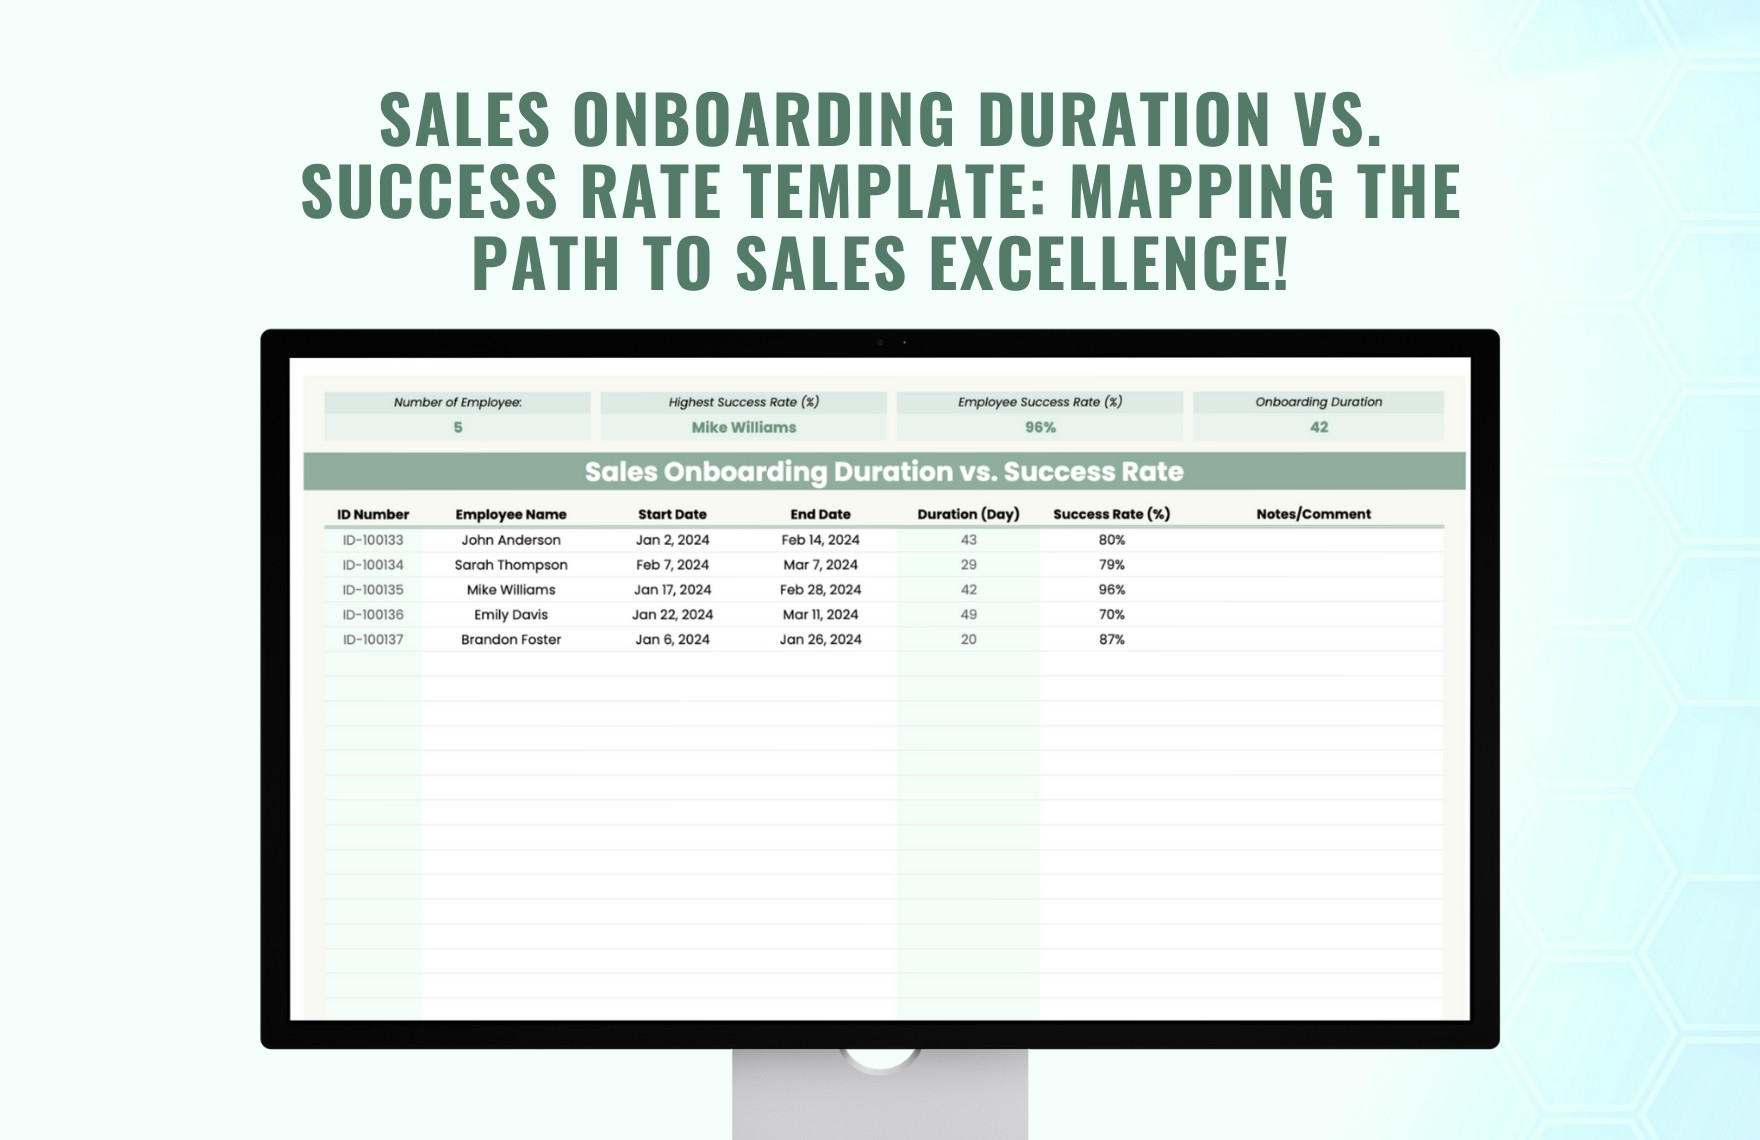 Sales Onboarding Duration vs Success Rate Template